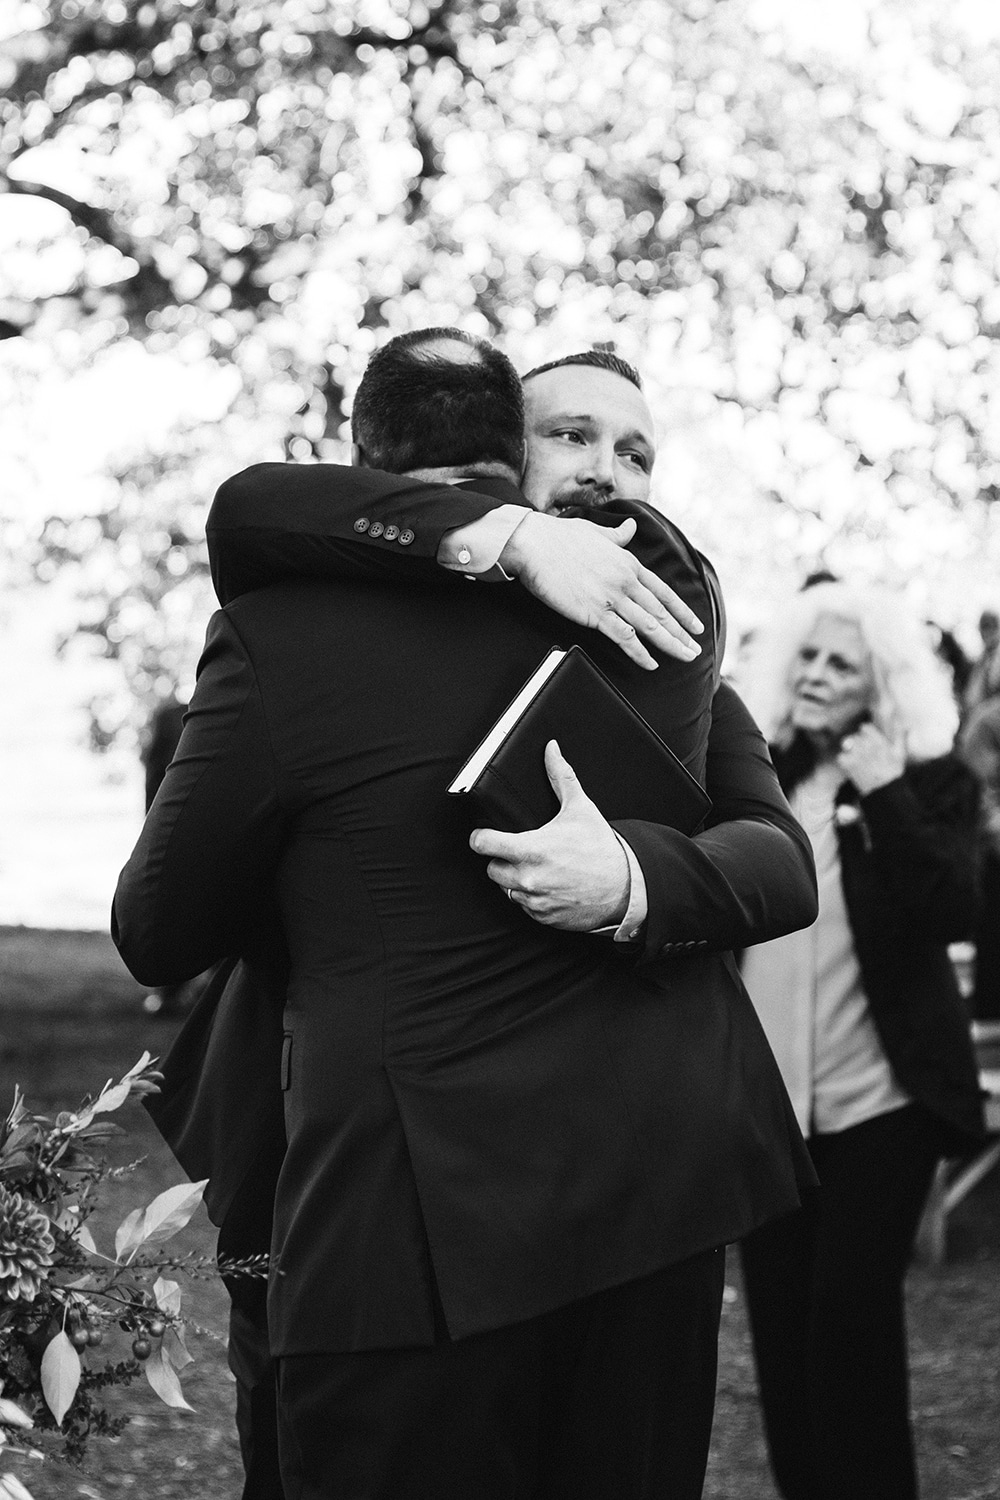 This documentary photograph of a groom hugging his friend after the ceremony is one of the best wedding photographs of 2016